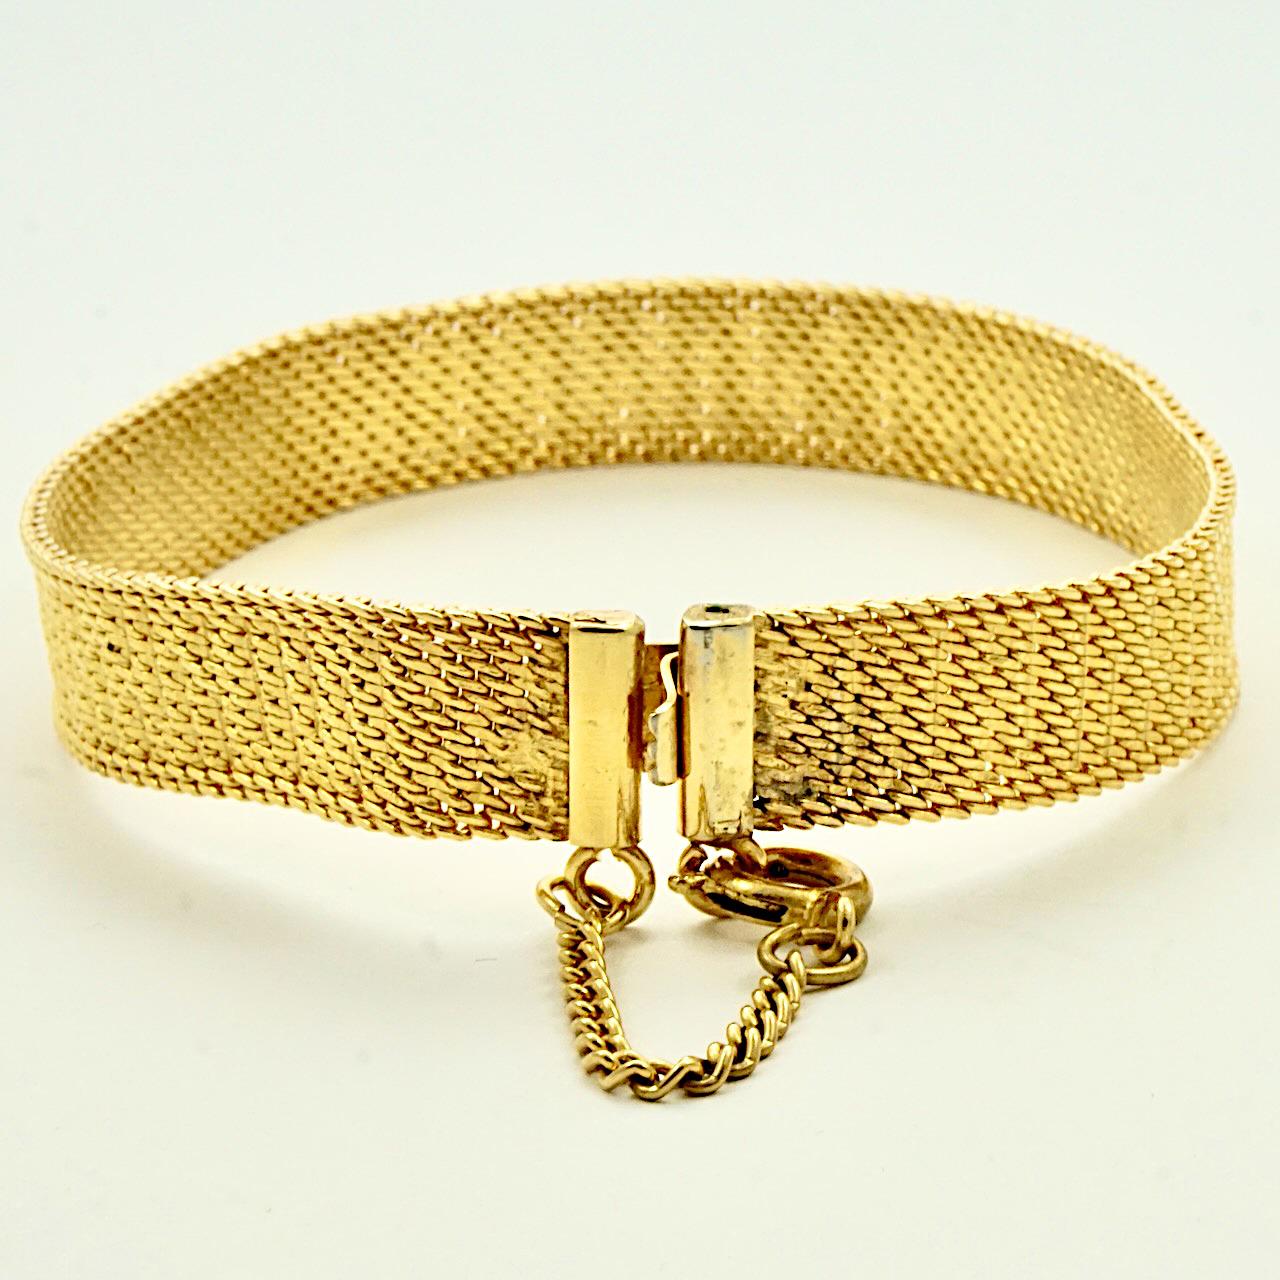 Beautiful gold plated mesh link bracelet, with a lovely ridged design, and a safety chain. Measuring length approximately 19.5 cm / 7.6 inches by width 1 cm / .39 inch. The bracelet is in very good condition.

This stylish mesh bracelet is circa